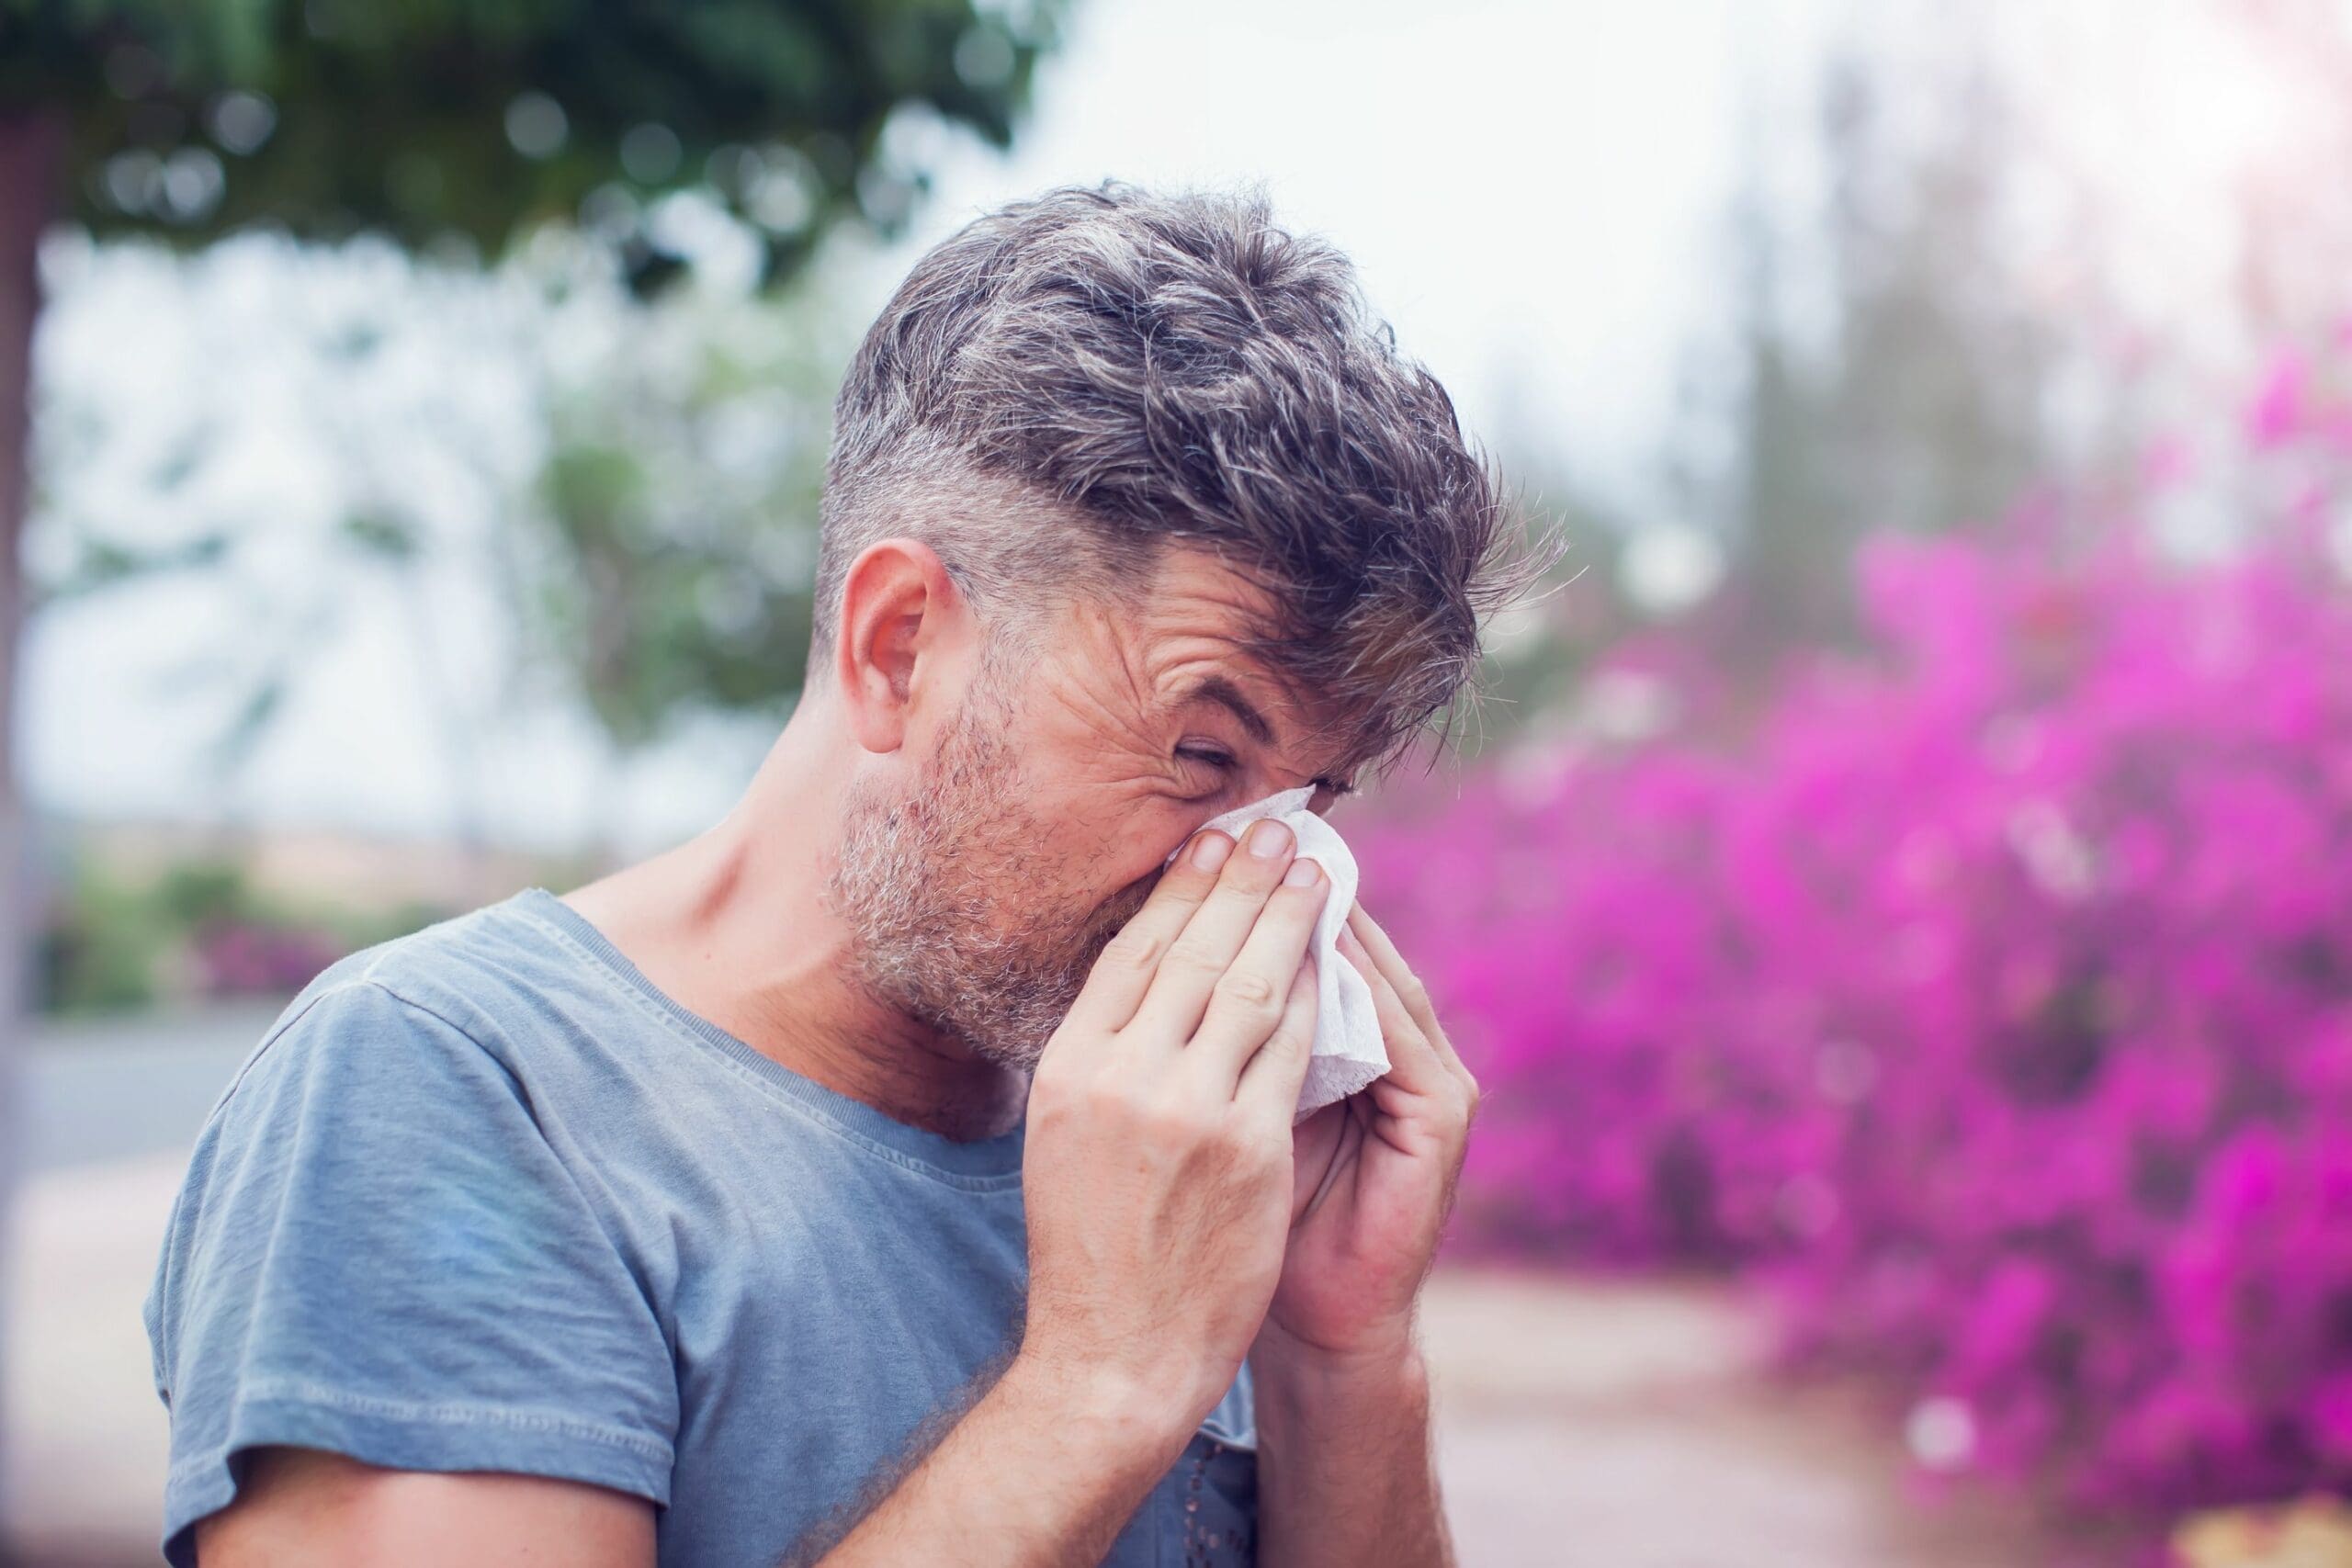 A GP’s advice on how to manage hayfever